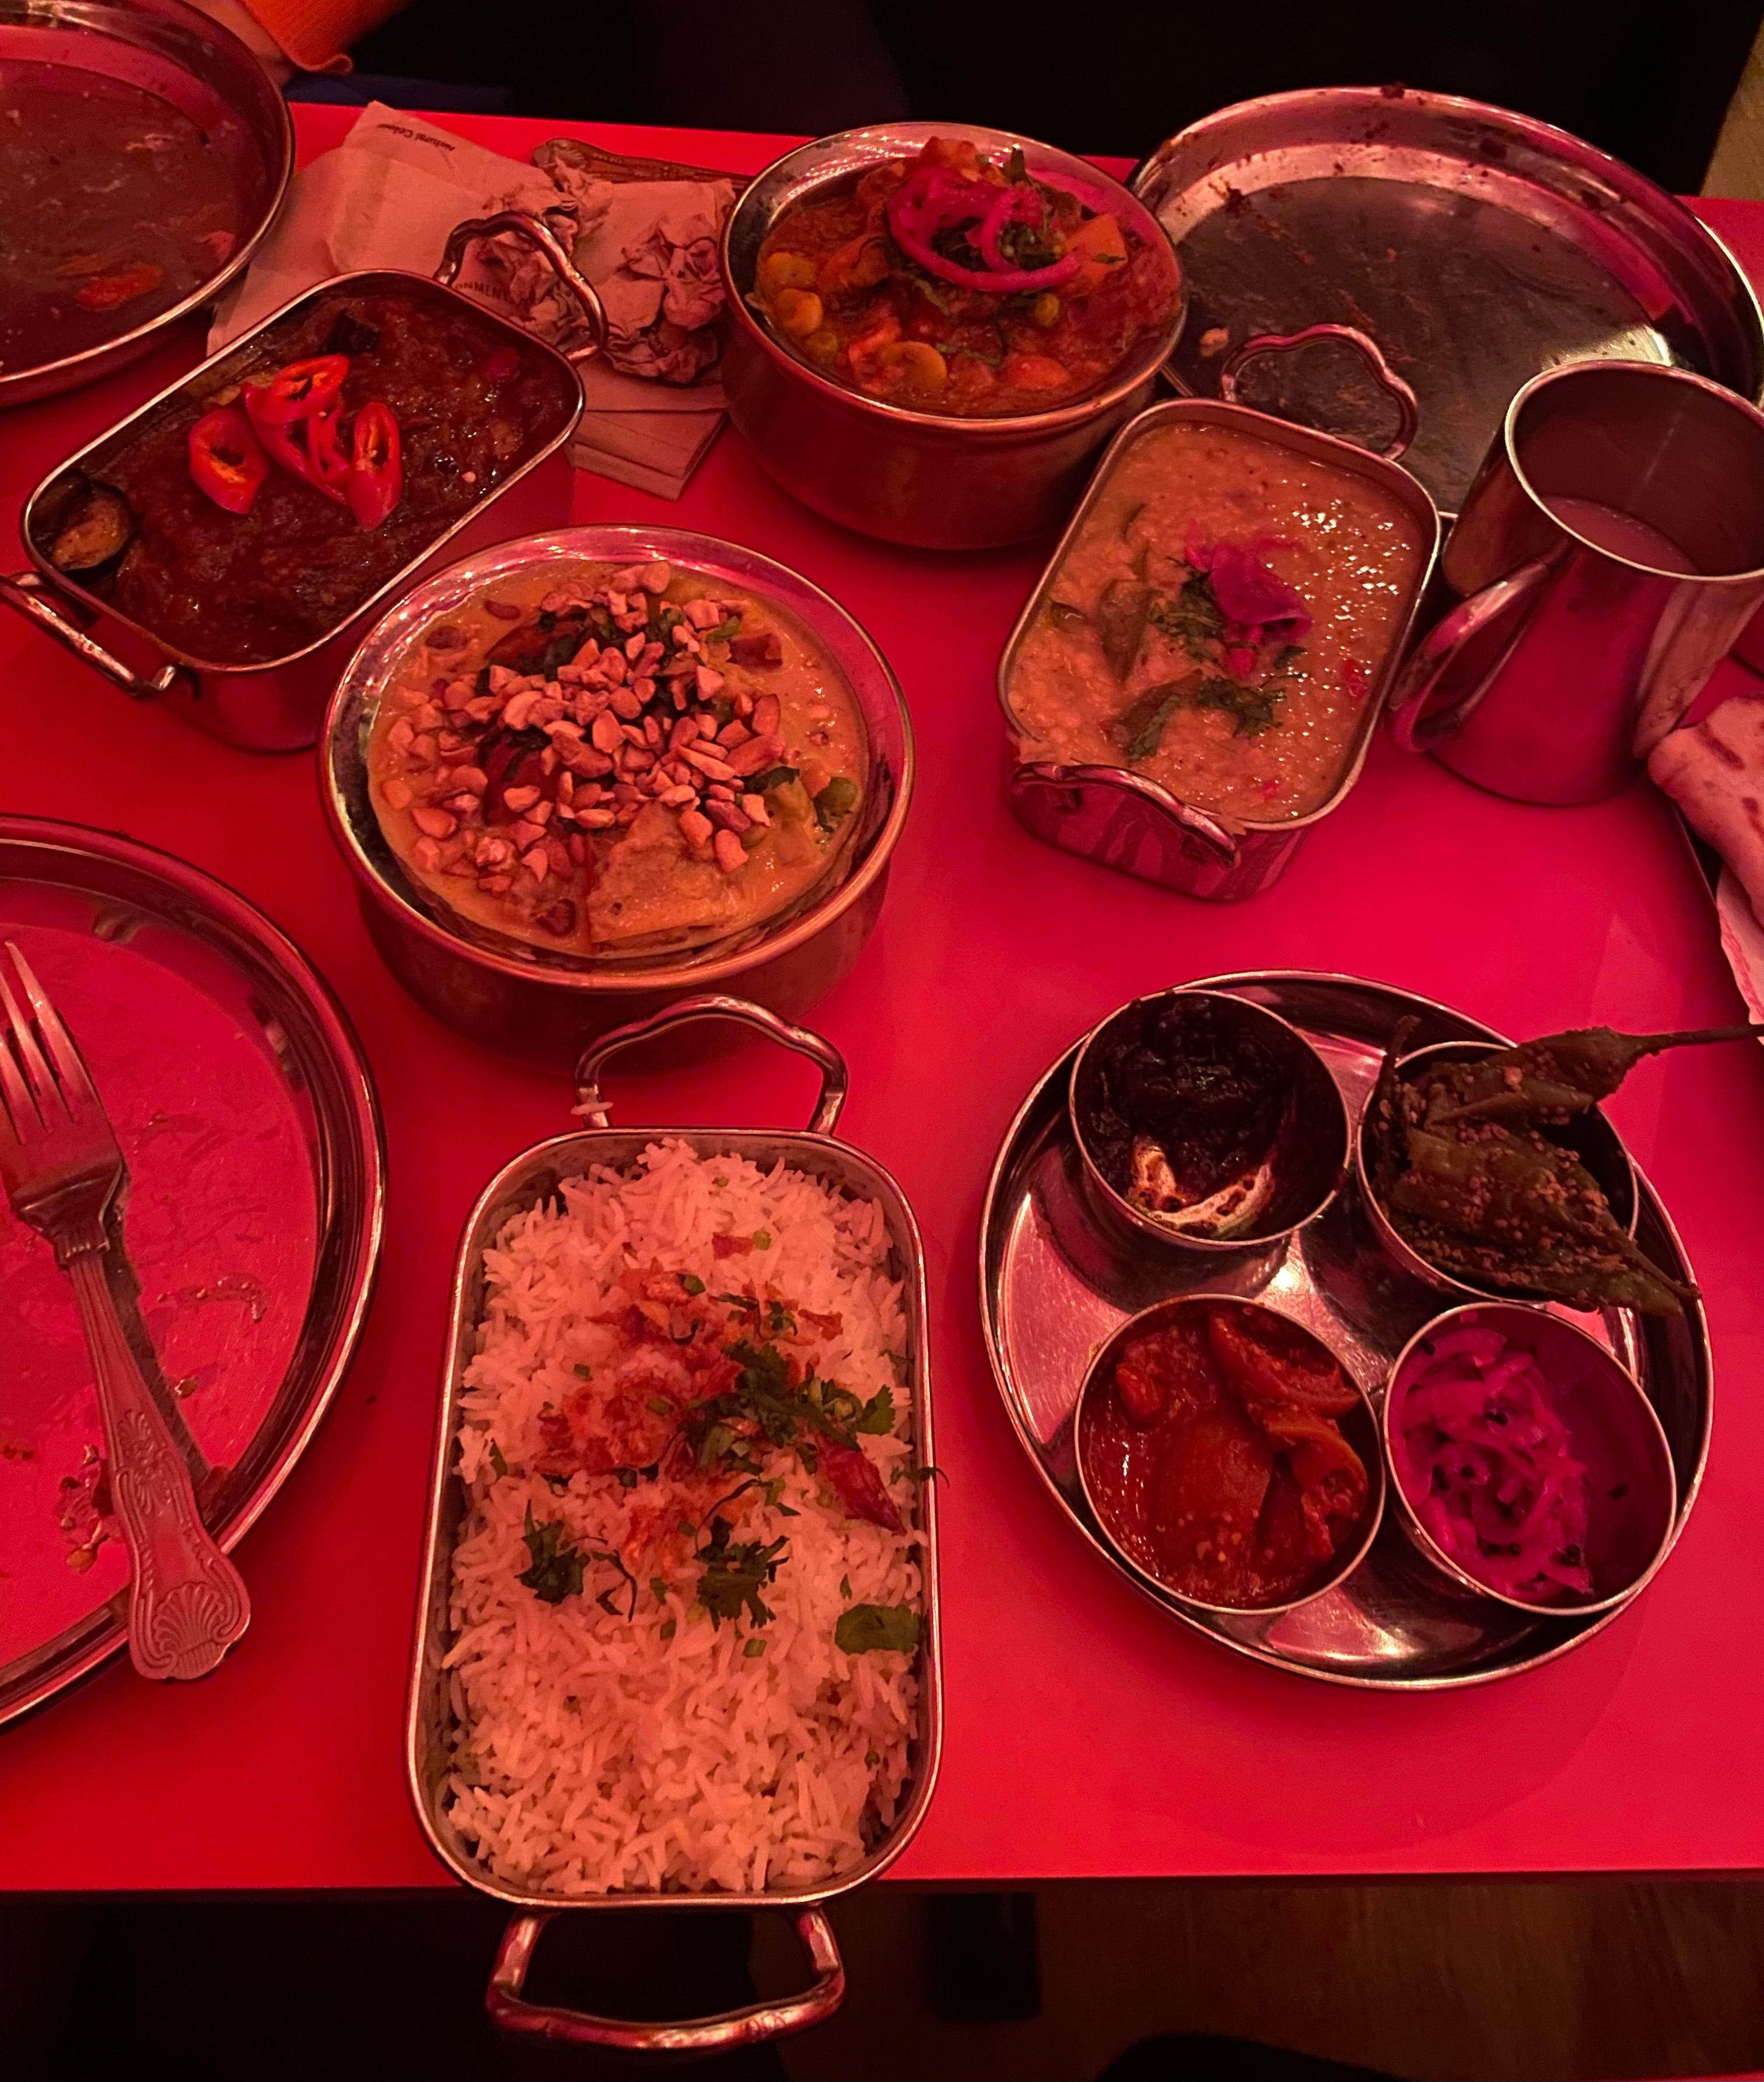 Spice Box: Expect generous portions of well-spiced, well-presented food overflowing with flavour